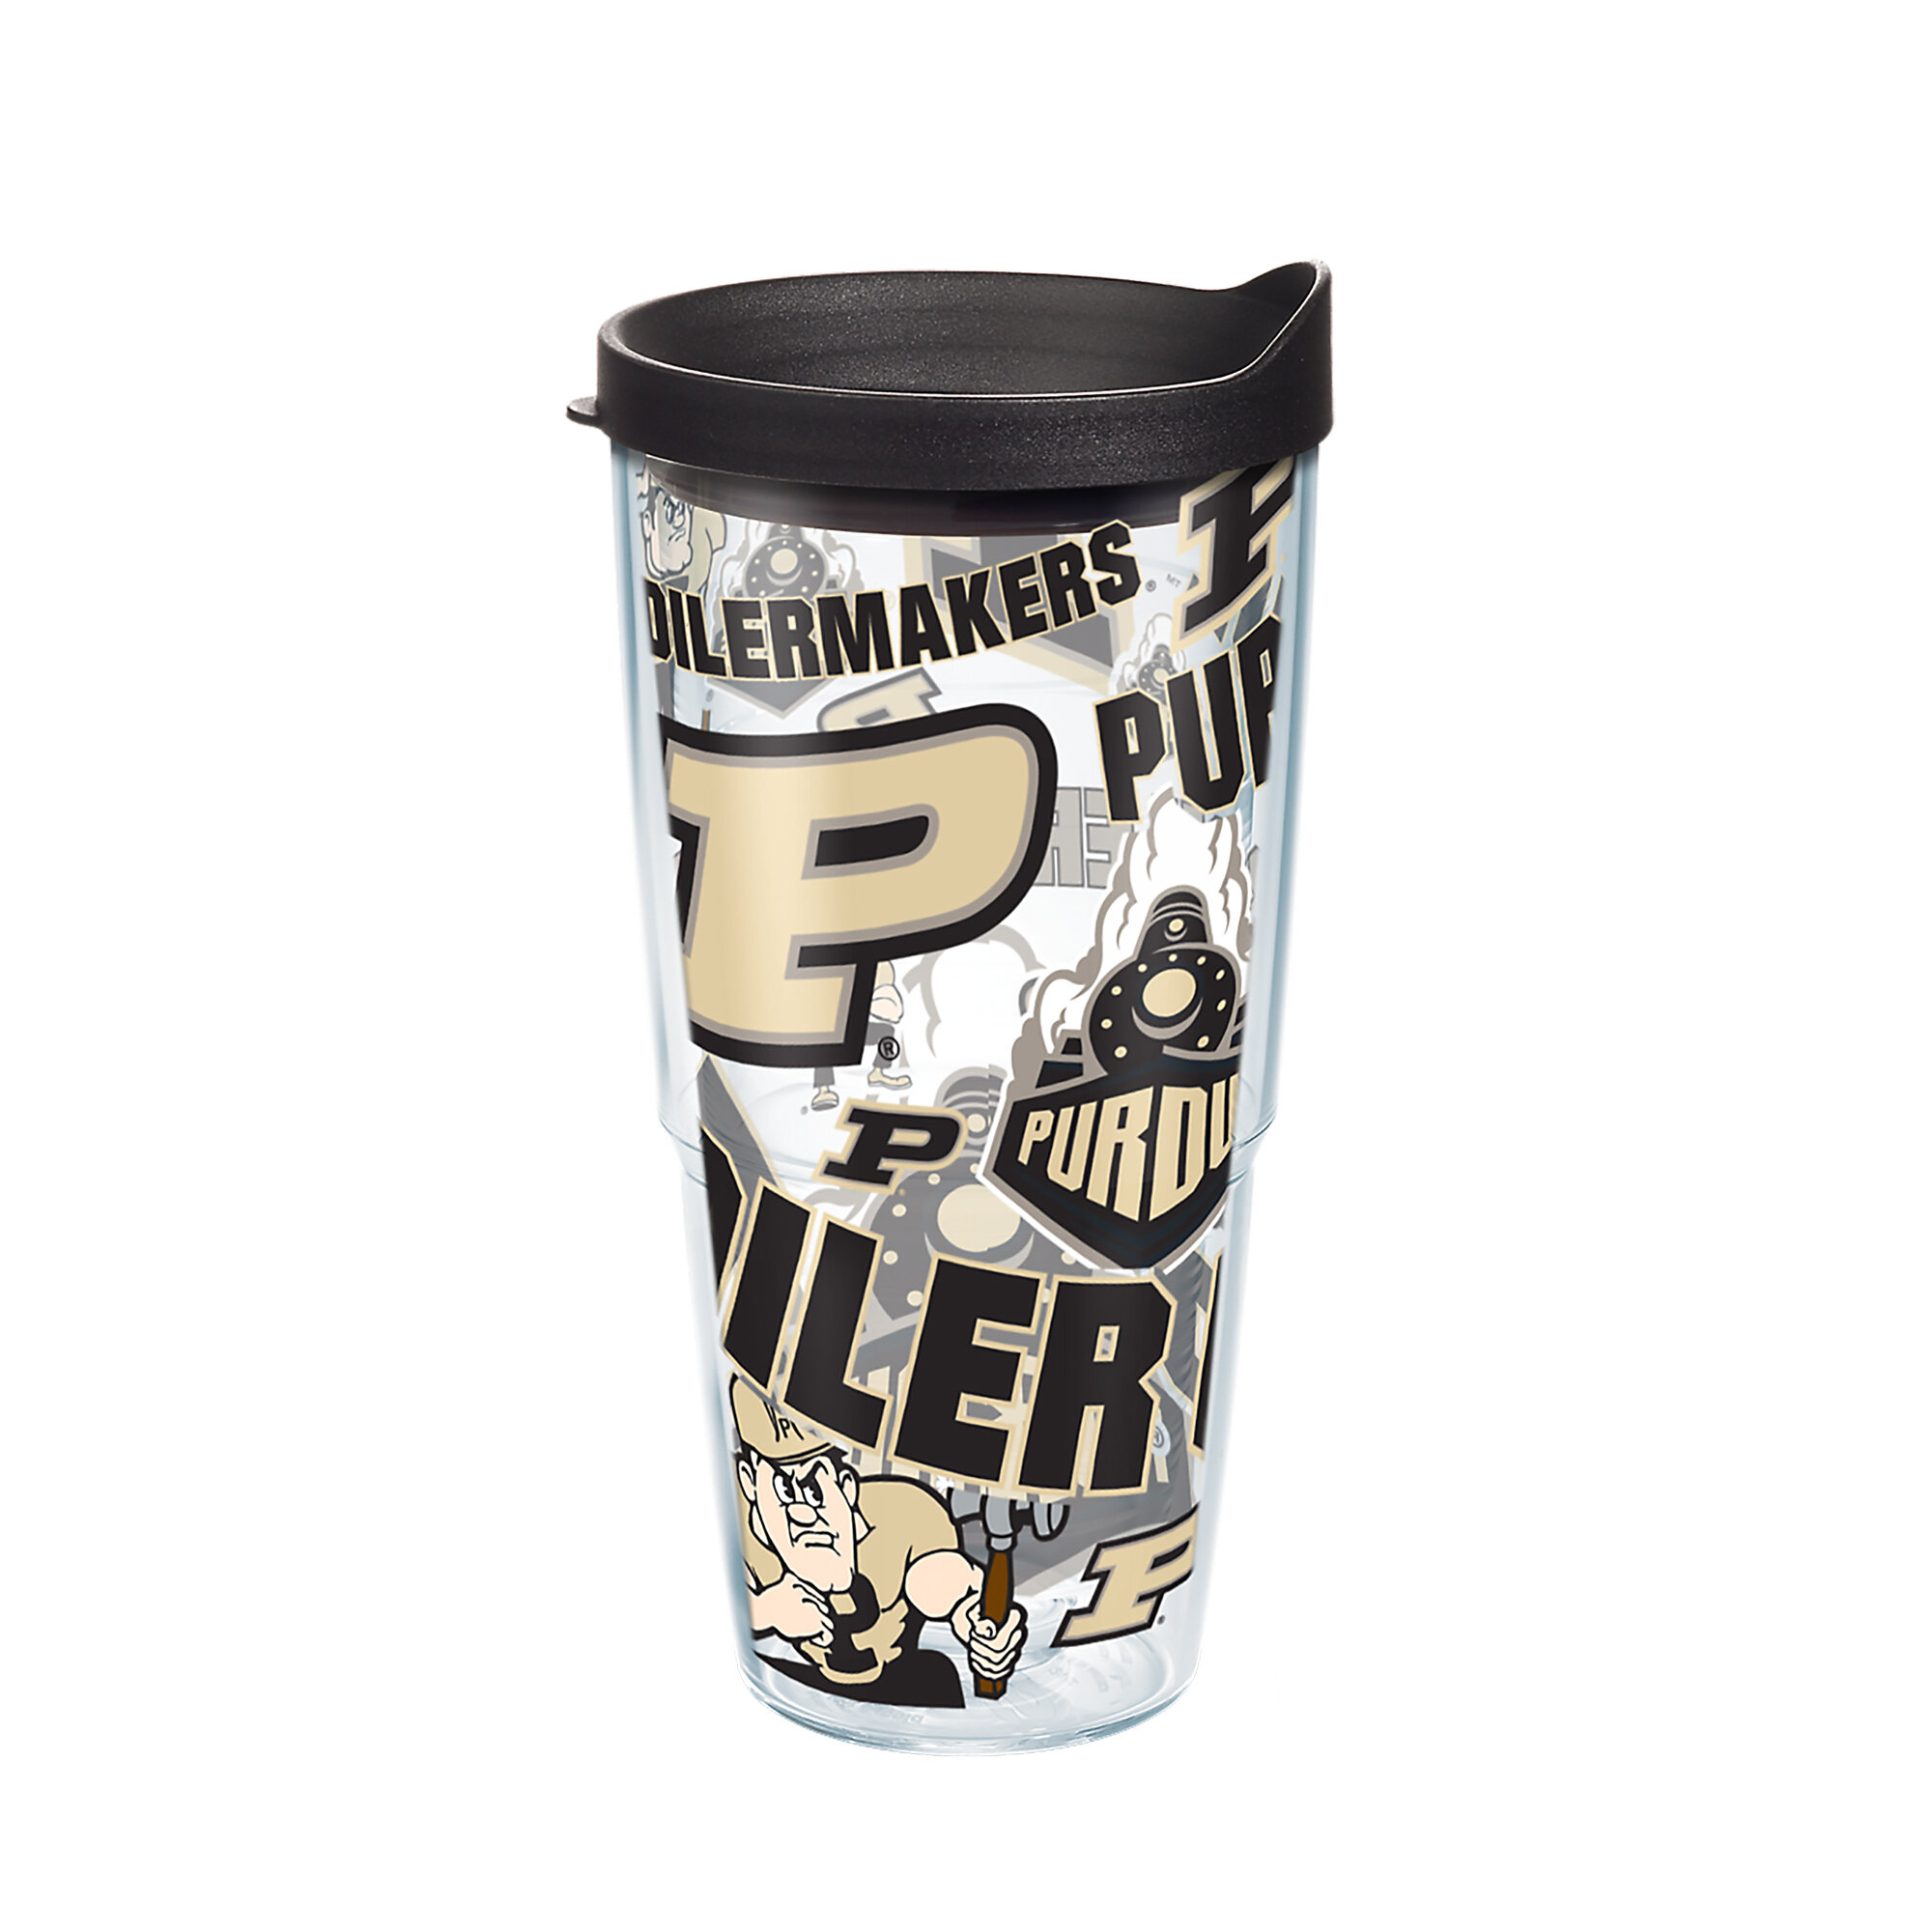 Gray Lid Train Logo Tervis Made in USA Double Walled Purdue University Boilermakers Insulated Tumbler Cup Keeps Drinks Cold & Hot 24oz Water Bottle 